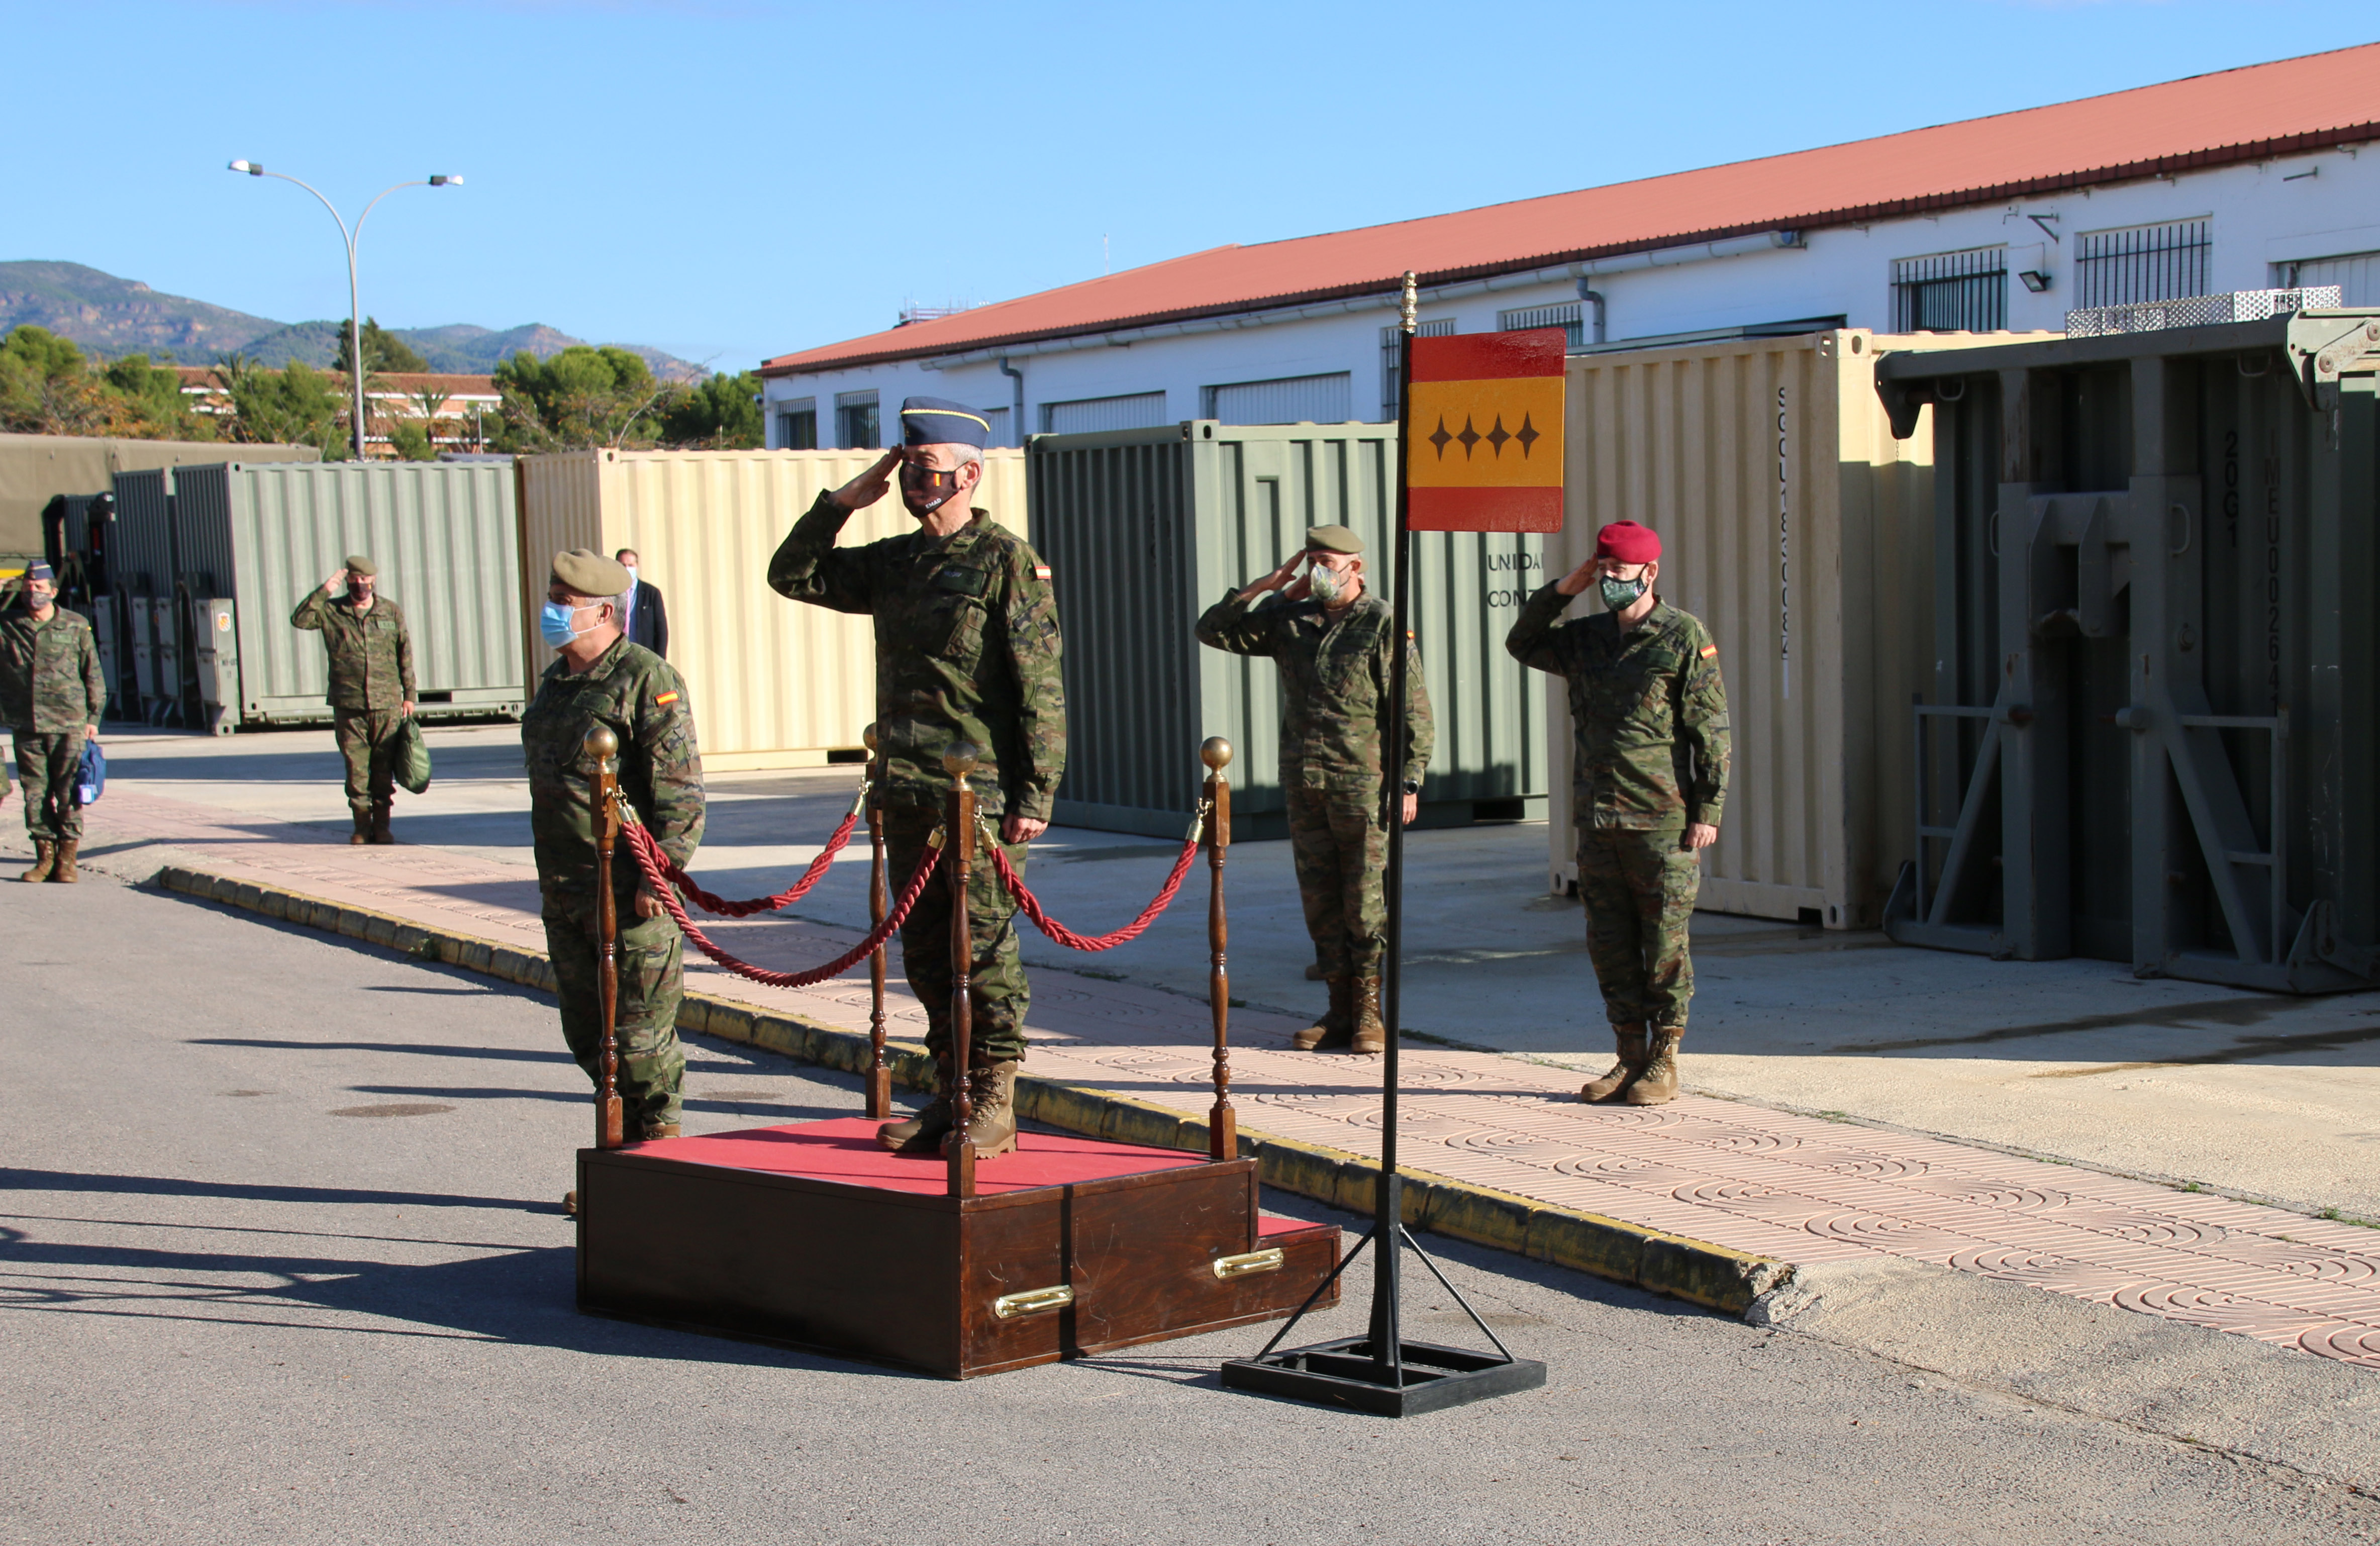 Spanish CHOD during the welcoming ceremony